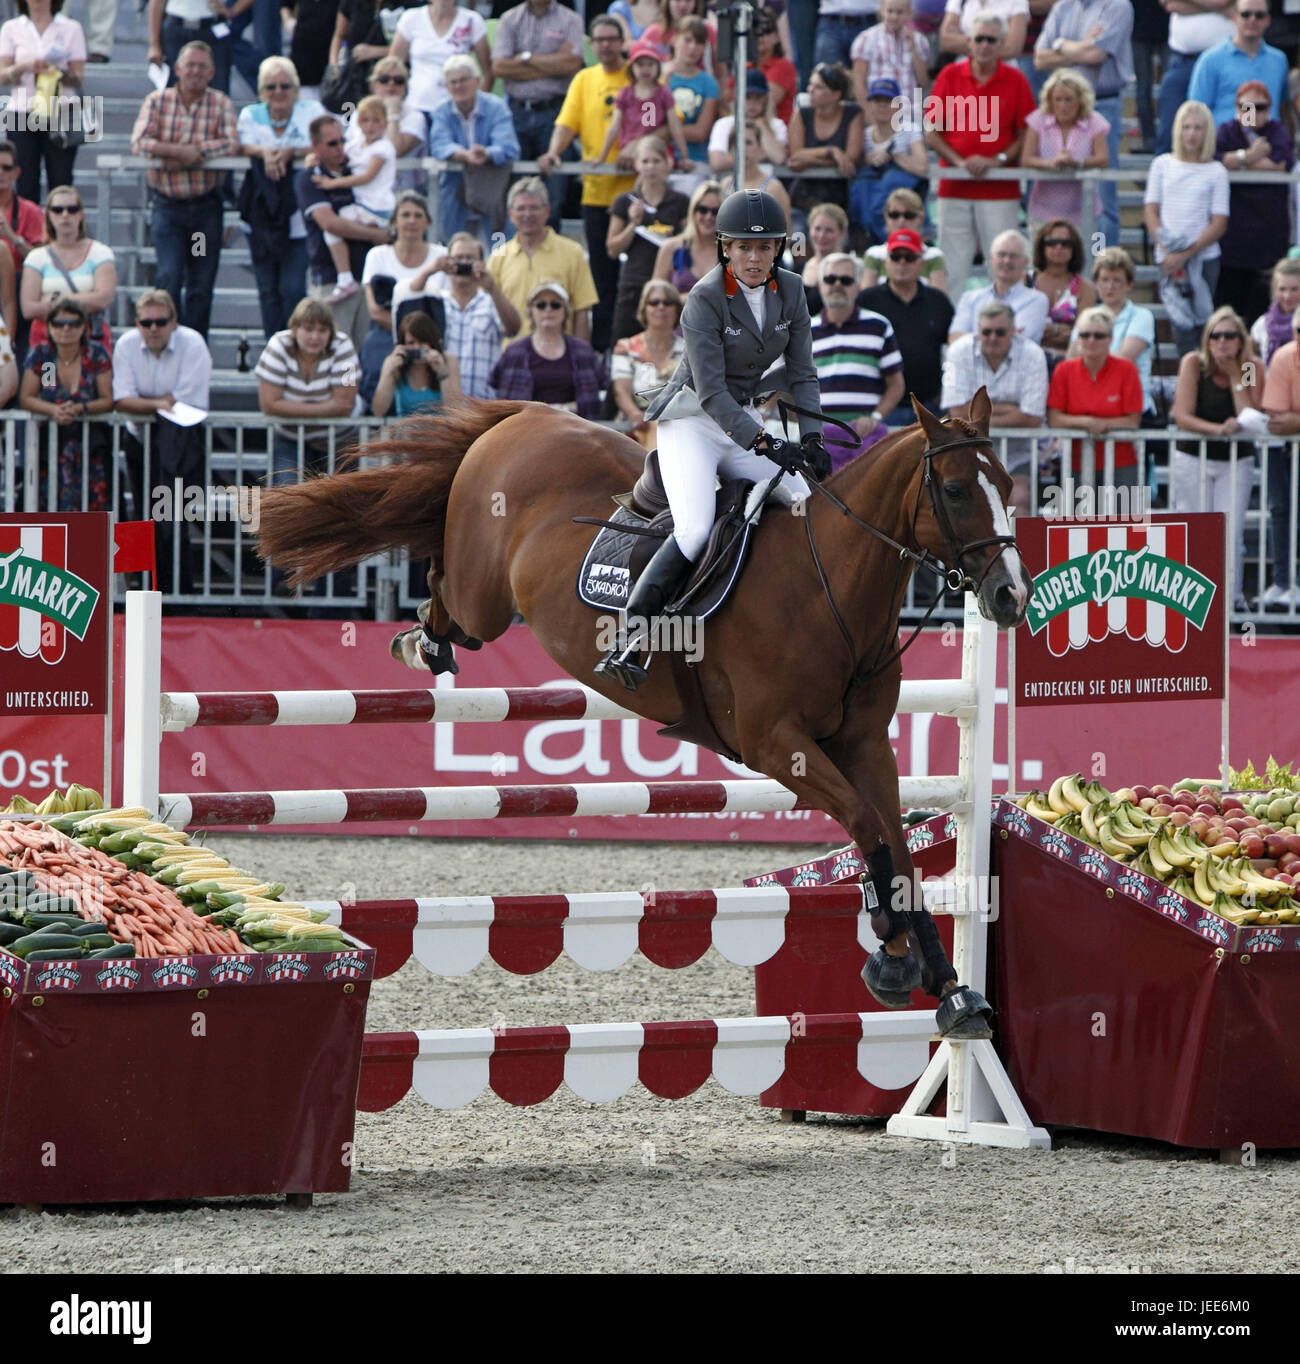 Horse-racing, German championships jumping and training in 2010 in Münster, Springreiterinnen, Meredith Michaels-Beerbaum on Le Mans 8, 2nd square, silver medal, Stock Photo